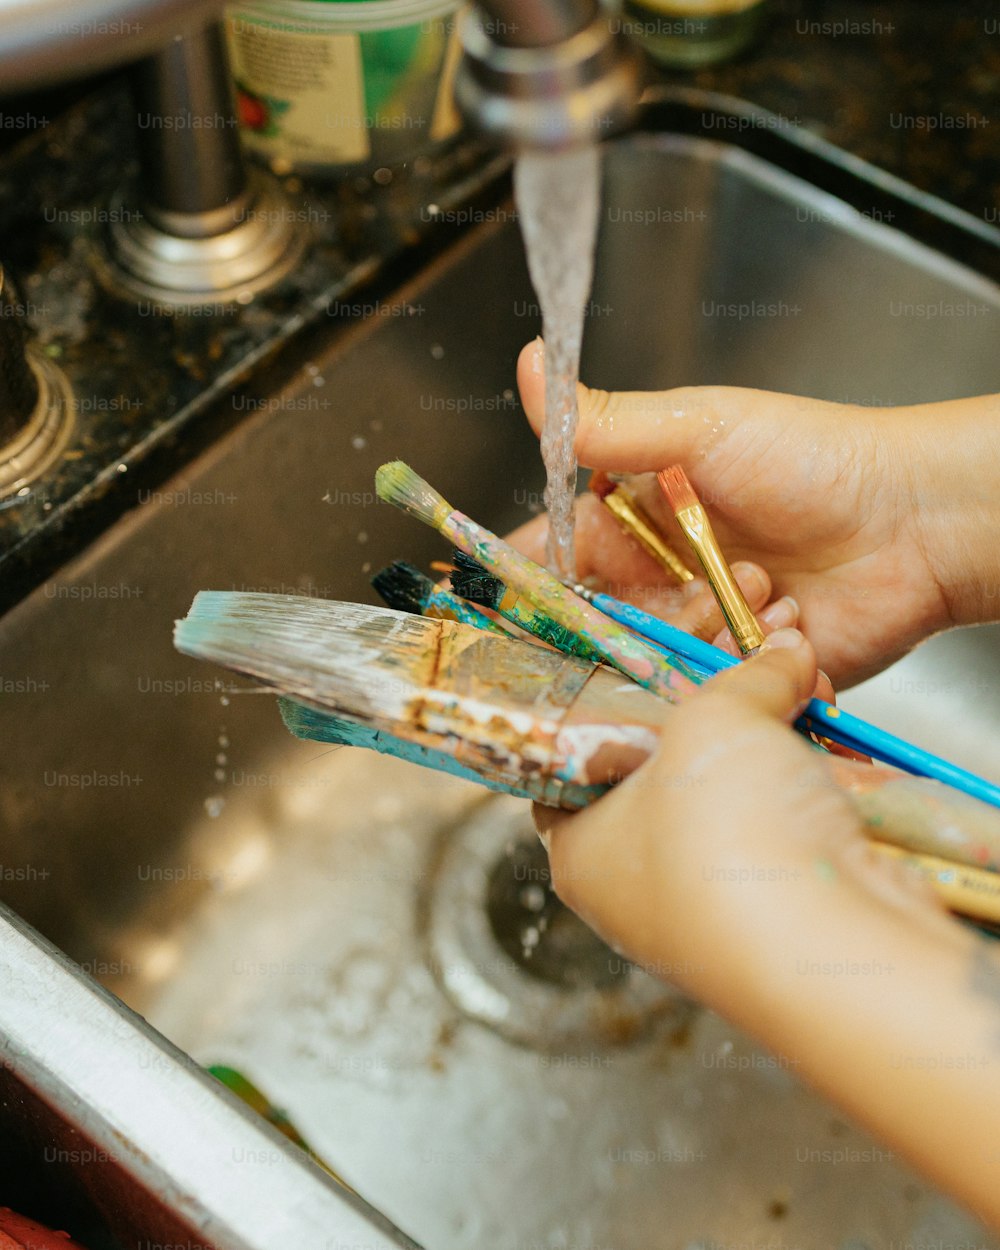 a person washing their hands with toothbrushes in a sink